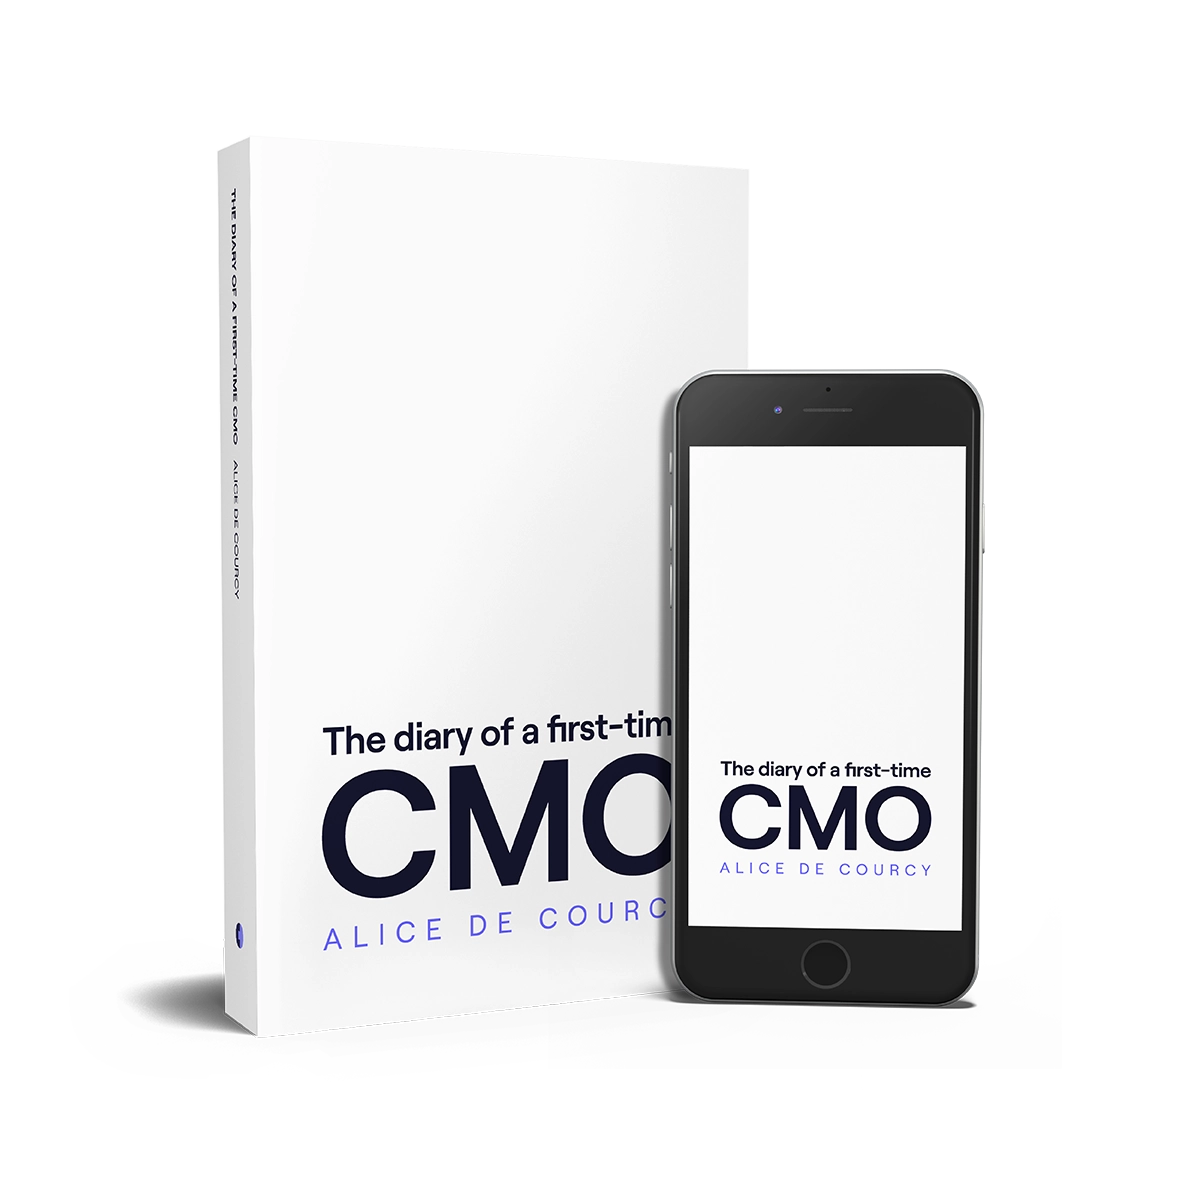 Diary of a first-time CMO by Alice De Courcy